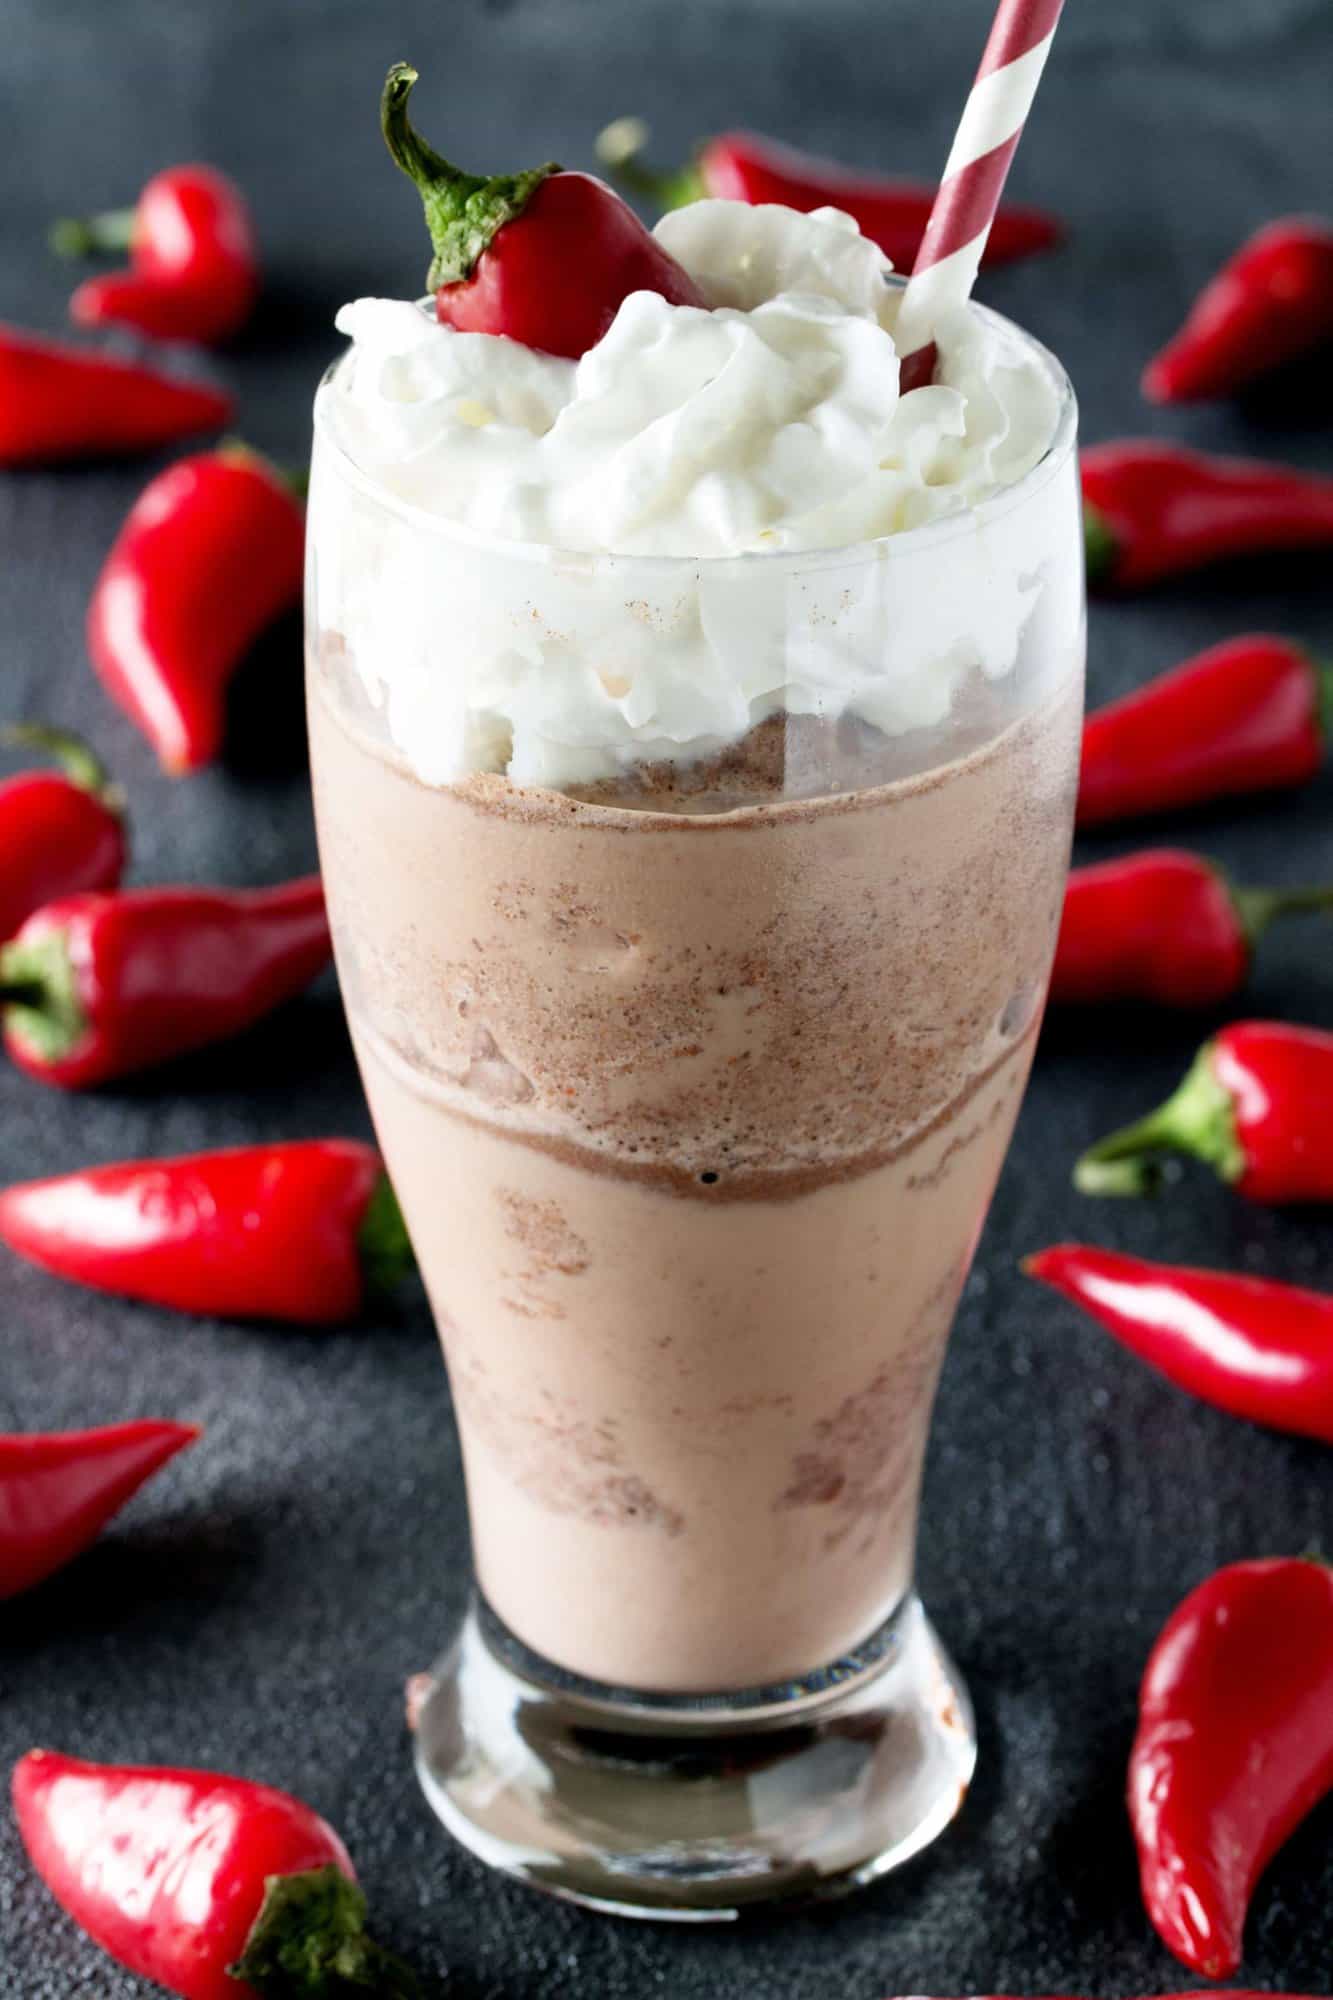 Homemade Mexican Chocolate Frappes are easy to make. This sweet, cold drink has just a bit of heat. It's the perfect summer treat.